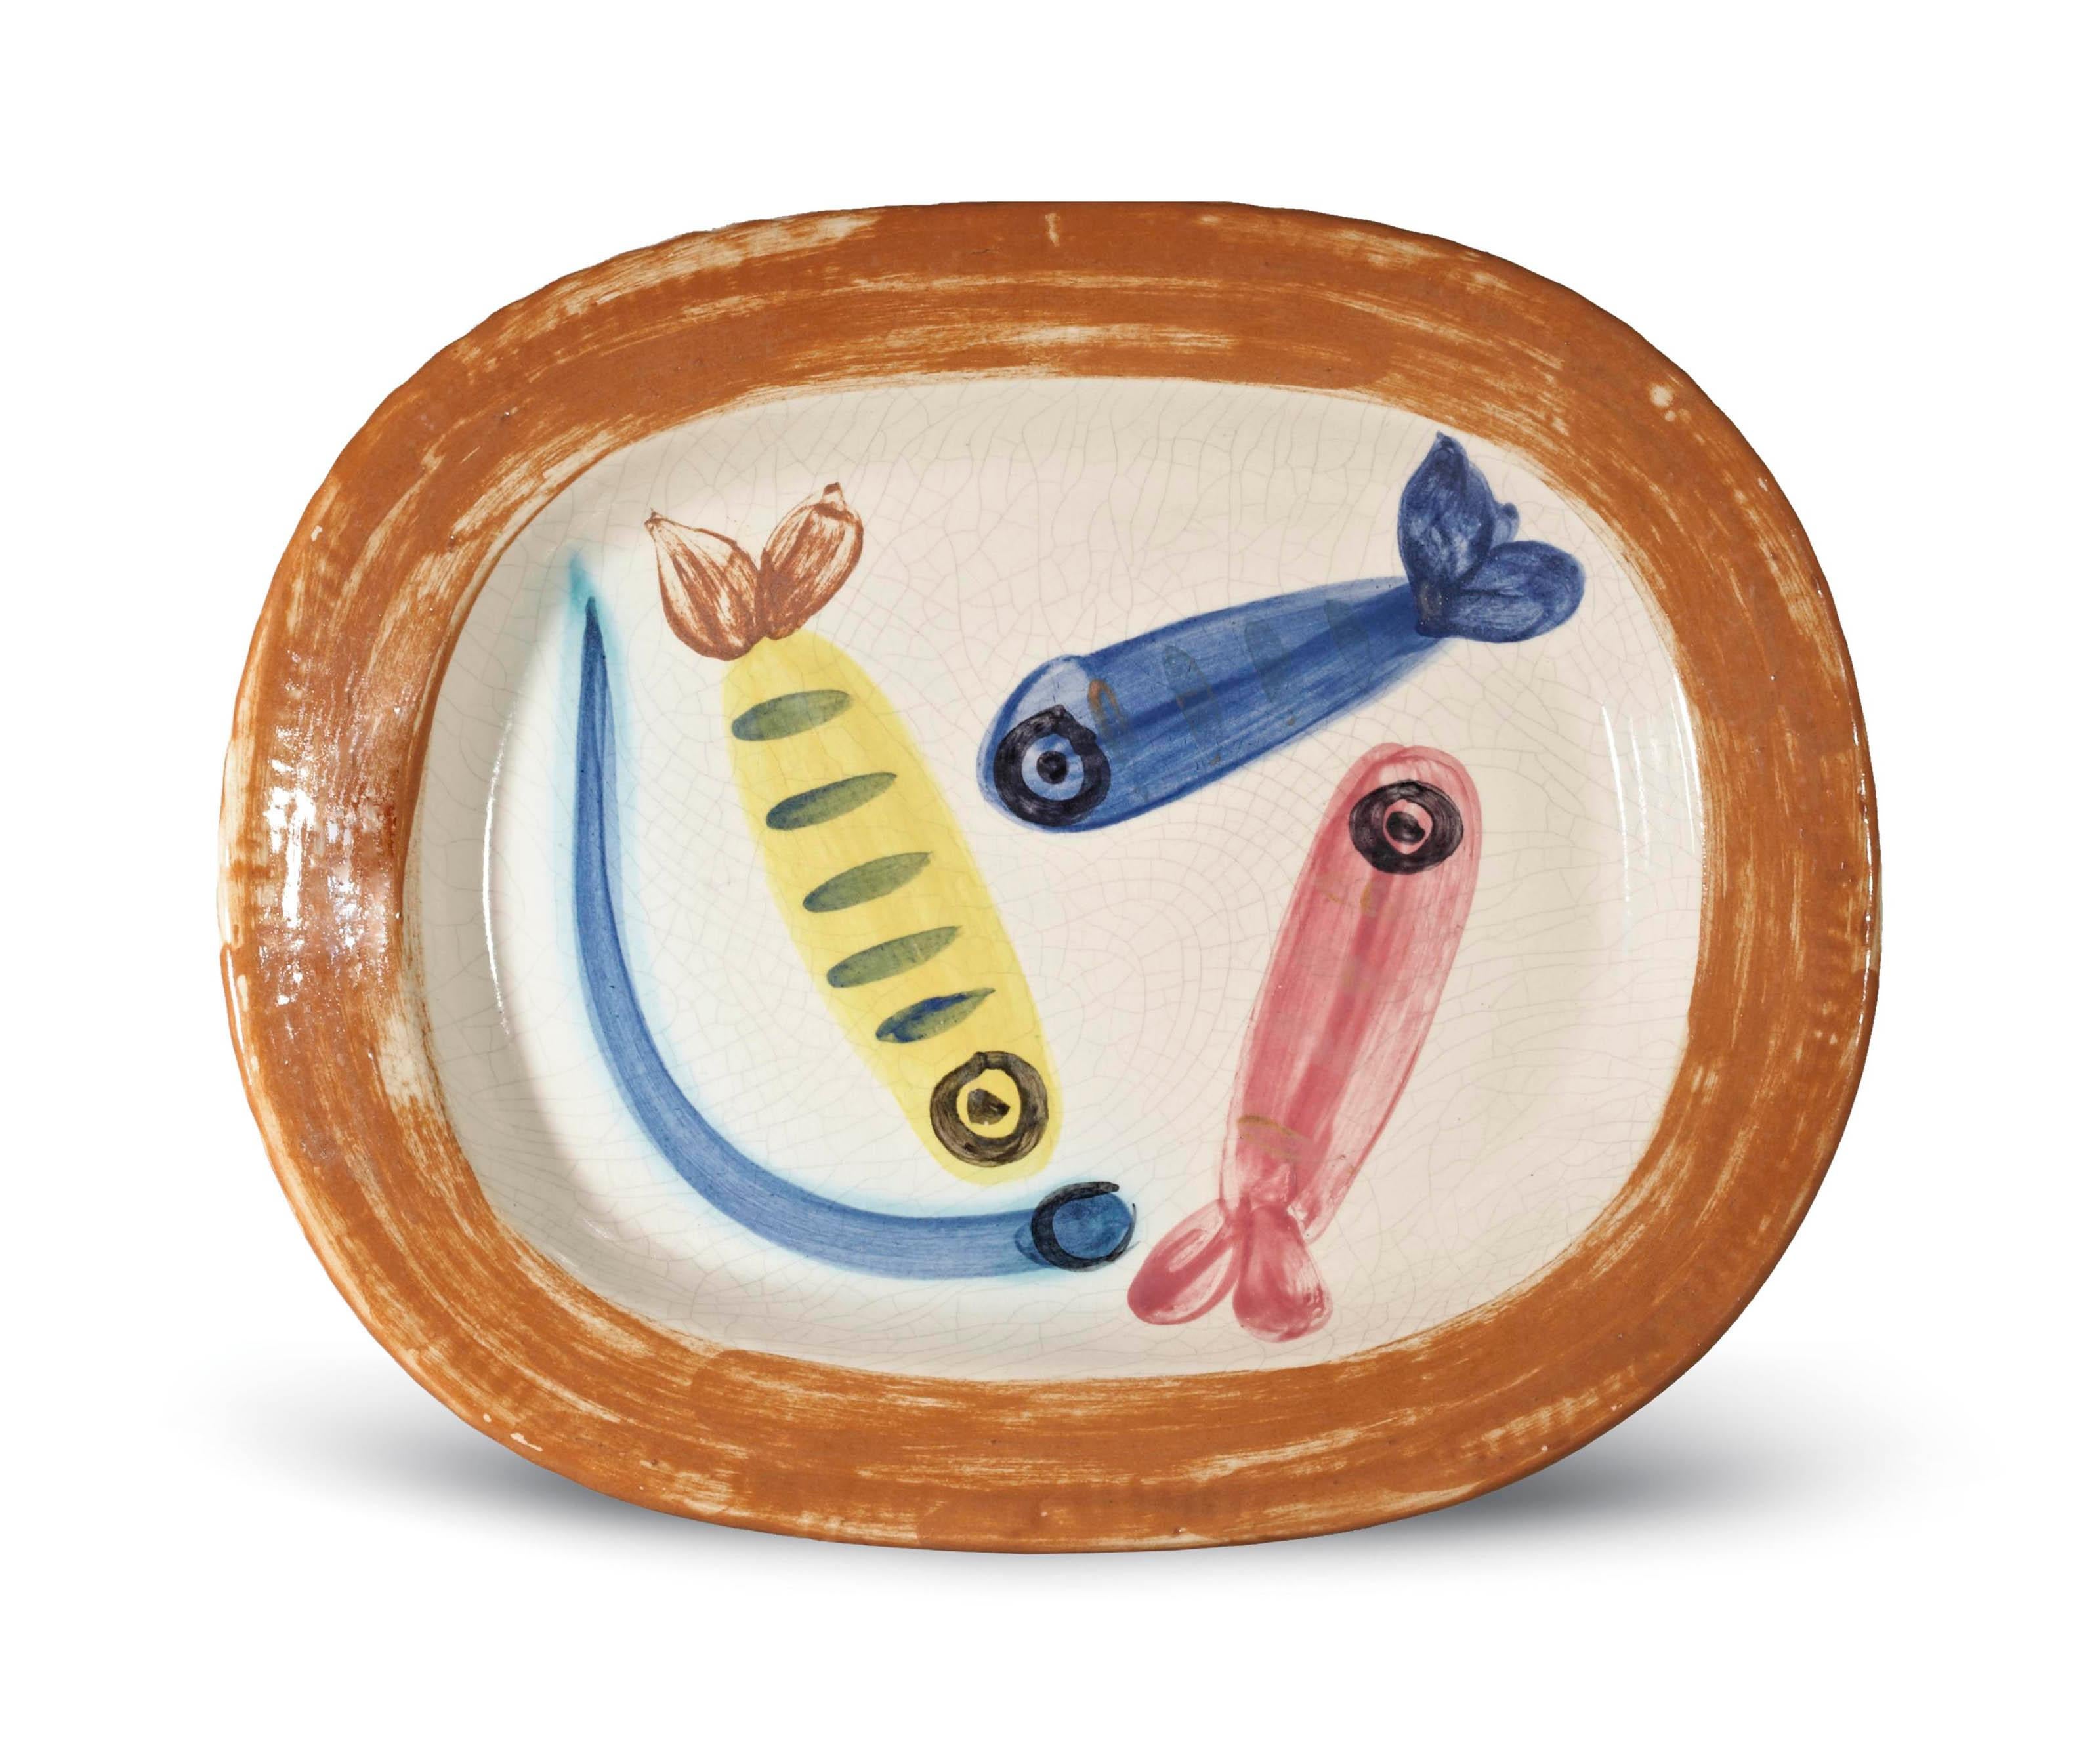 This Picasso ceramic plate "Quatre poissons polychromes Ramié 31" is one in an edition of 200 and is made of white earthenware clay, and decorated with colored engobes and glaze.   

Please contact us with any questions.